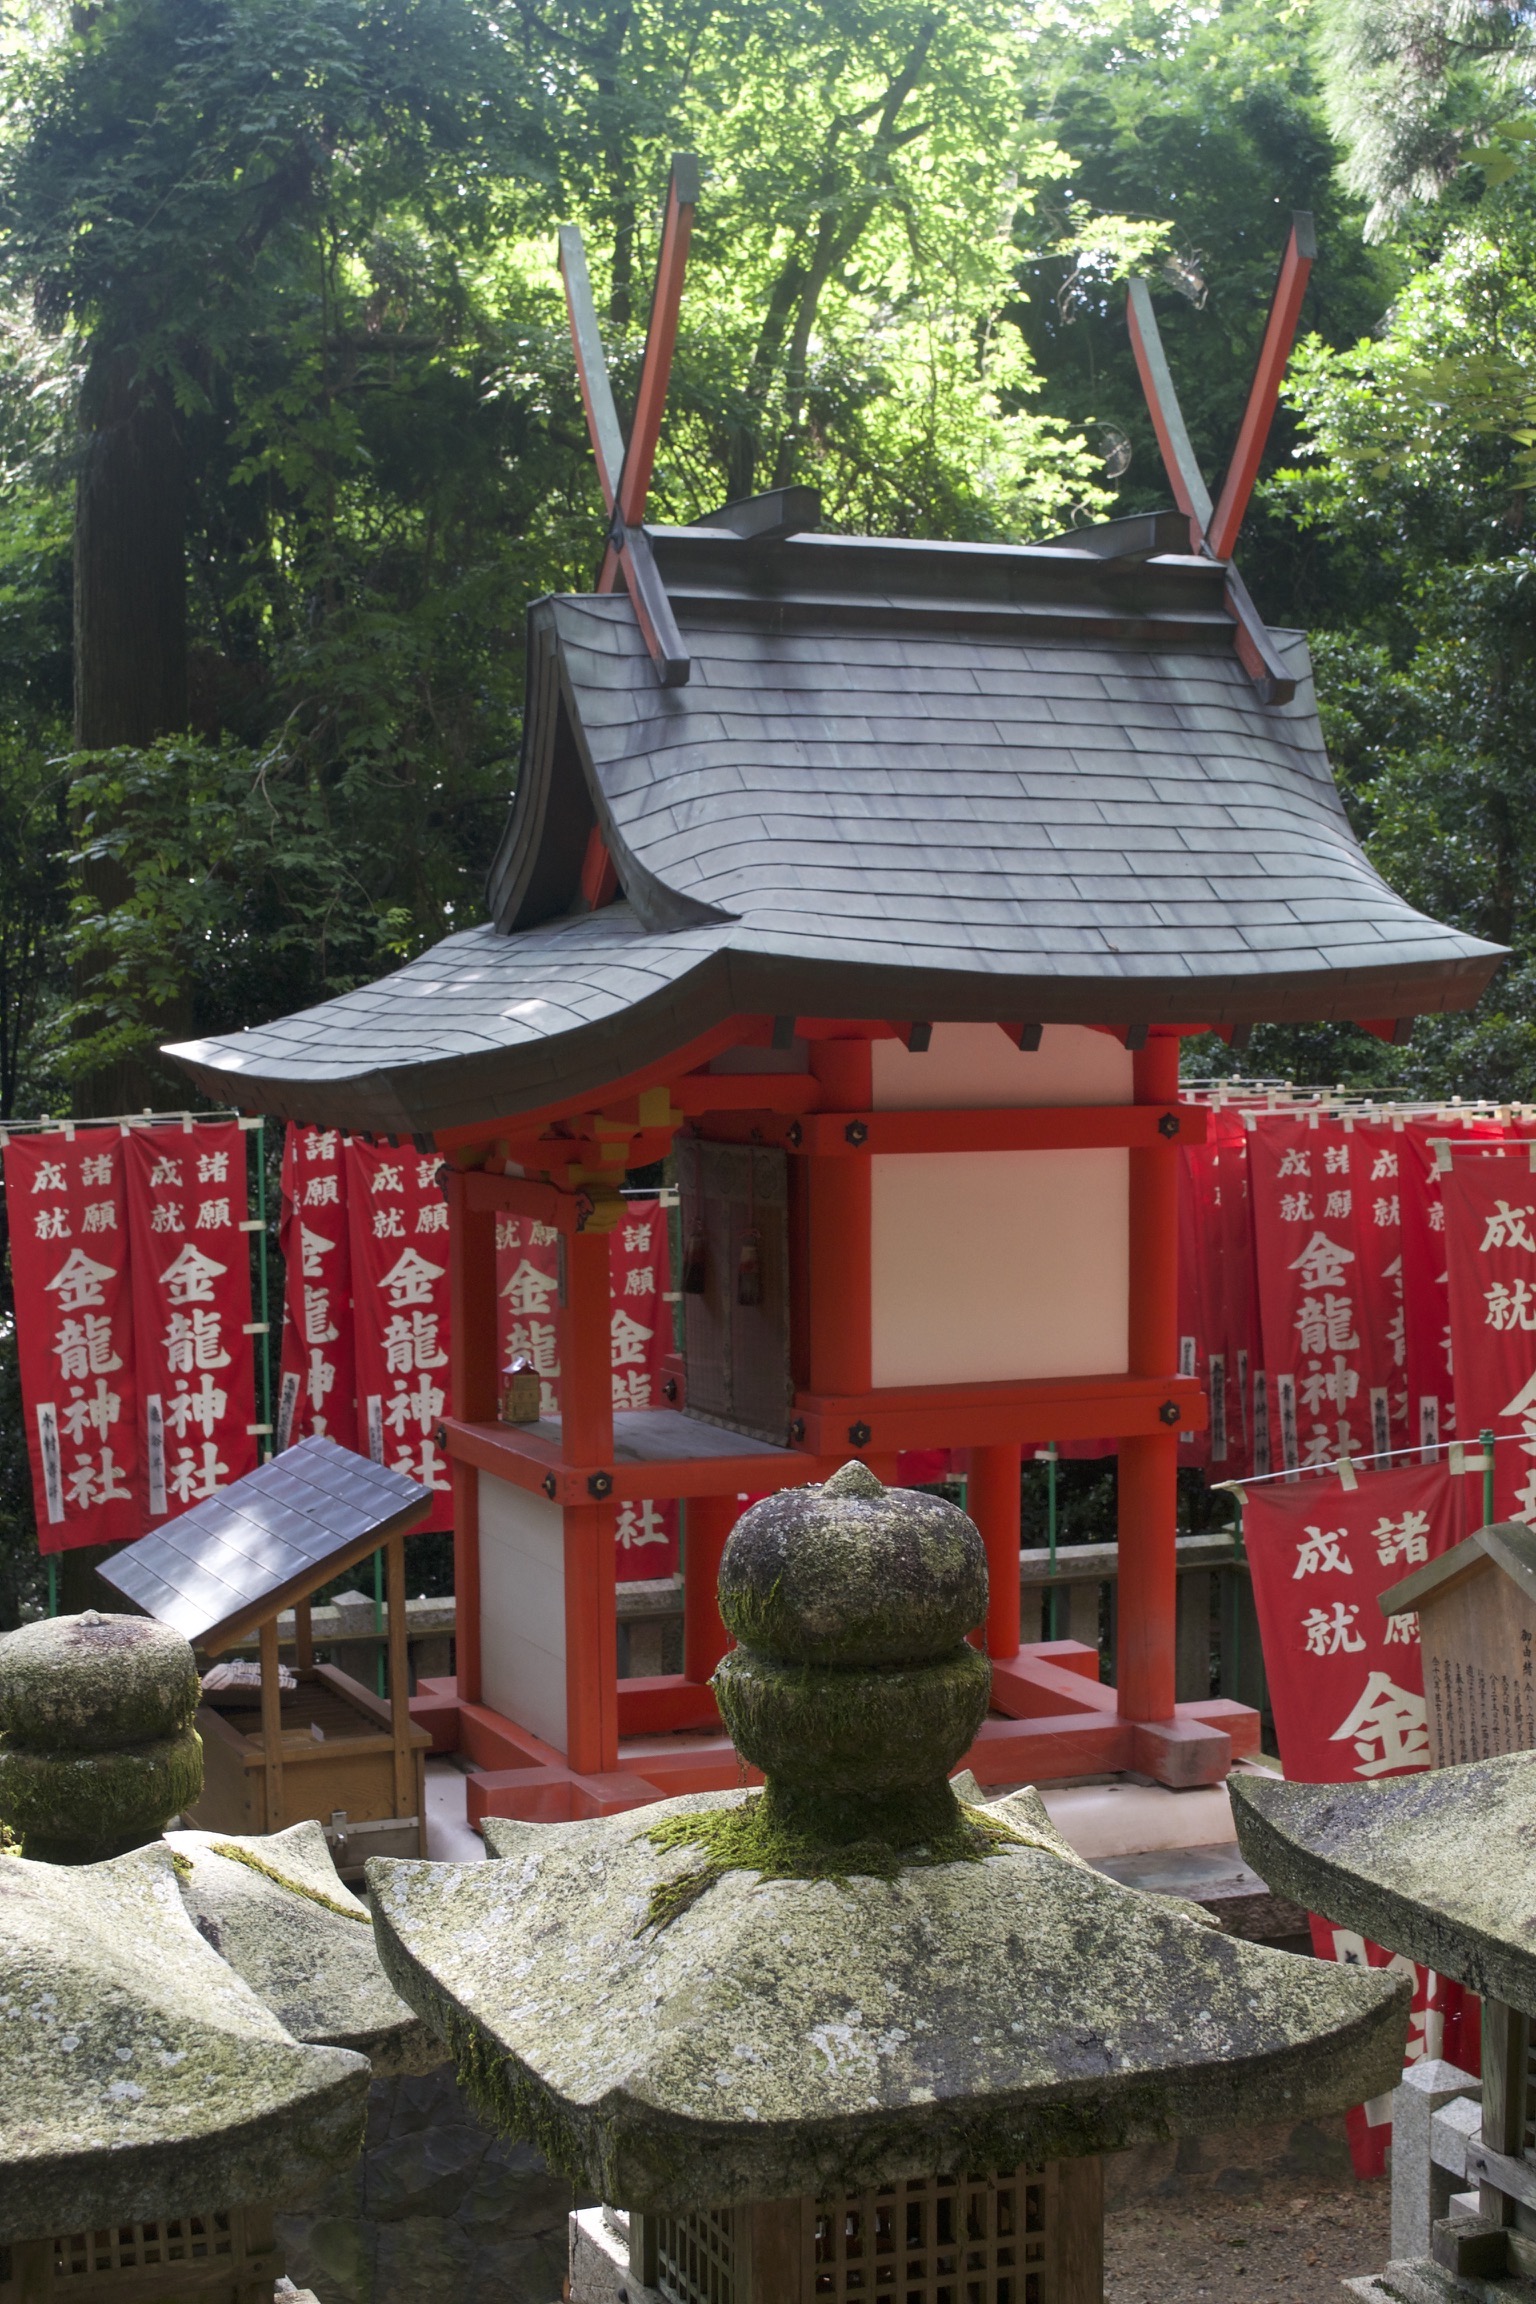 A white shrine with red trim and a slanted black roof sits before some mossy stone monuments.  Red banners with white lettering hang before the trees in the background.